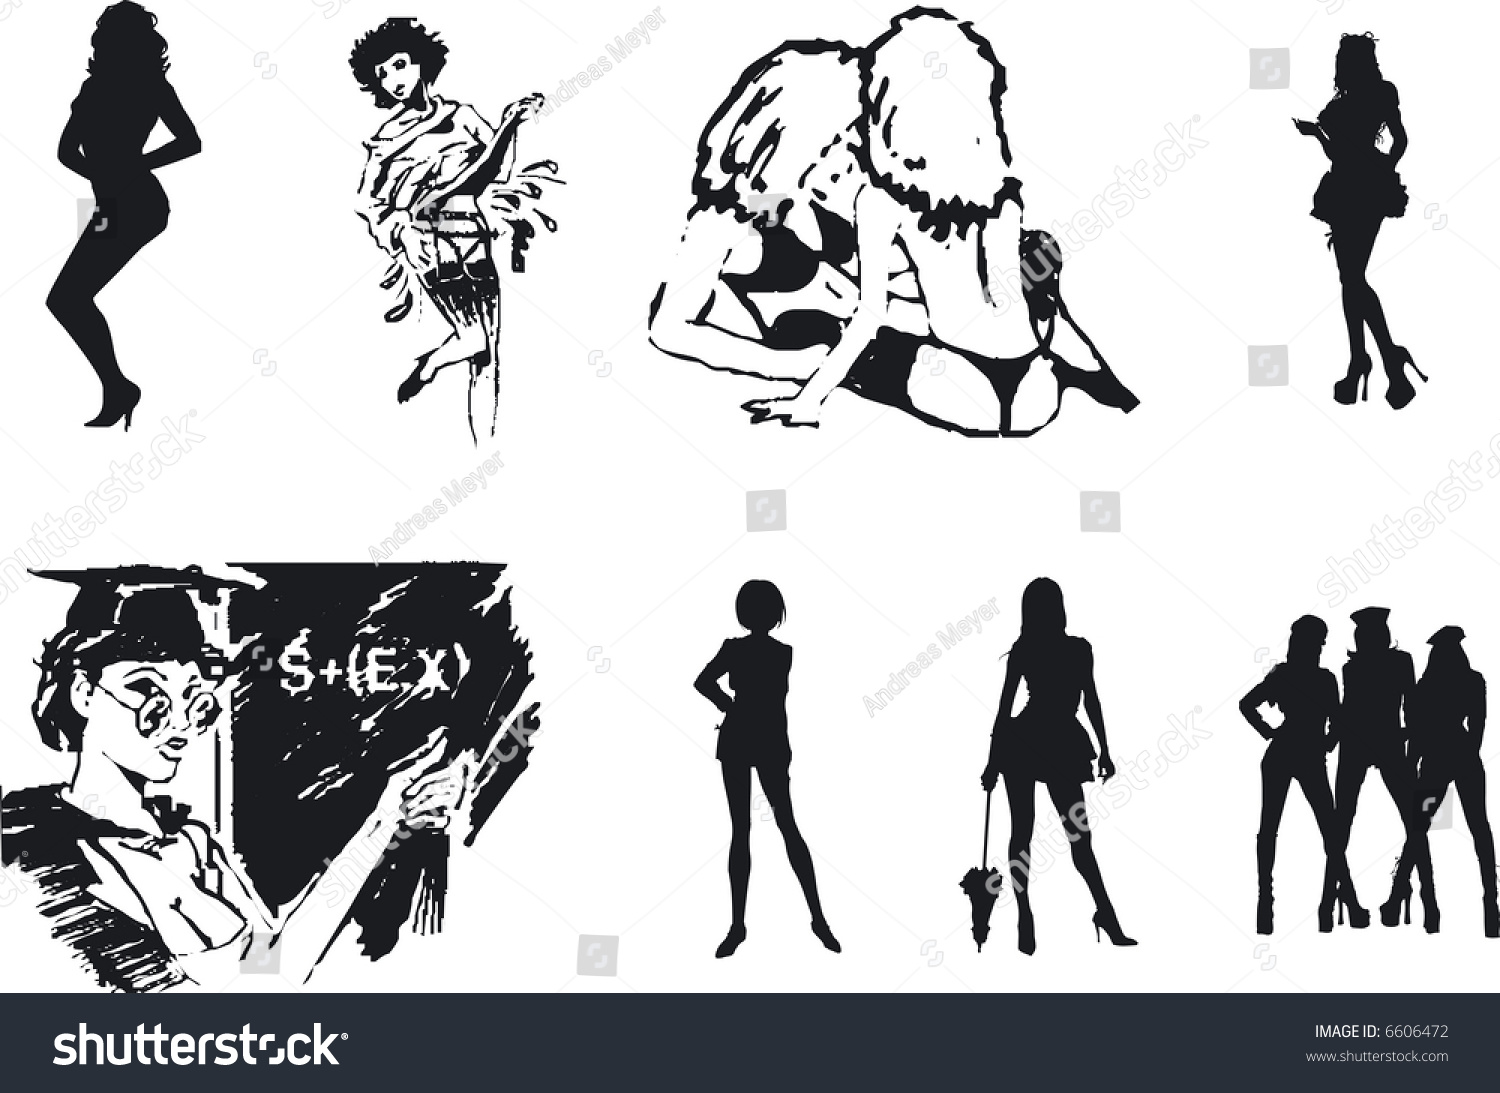 Illustration Sexy Woman Silhouettes Stock Vector Royalty Free 6606472